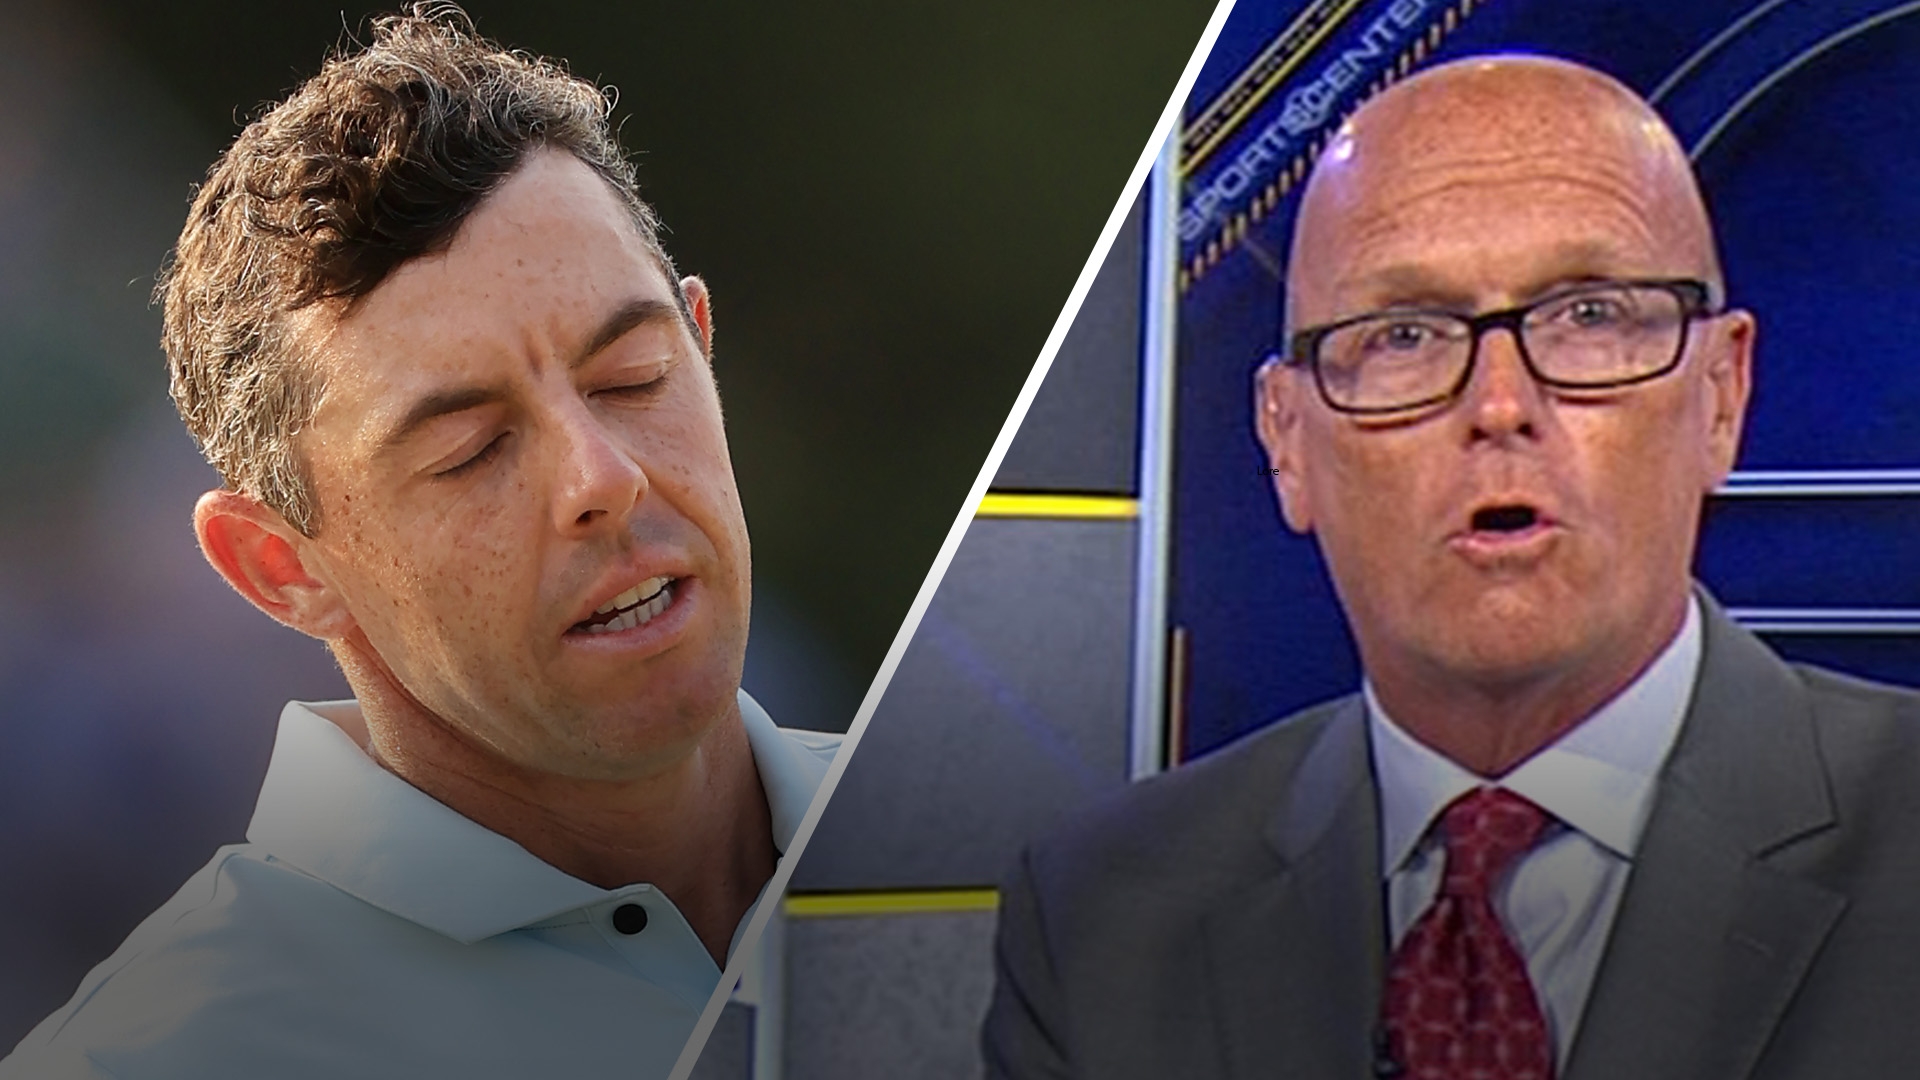 SVP on McIlroy leaving immediately after losing U.S. Open: 'It will be remembered'